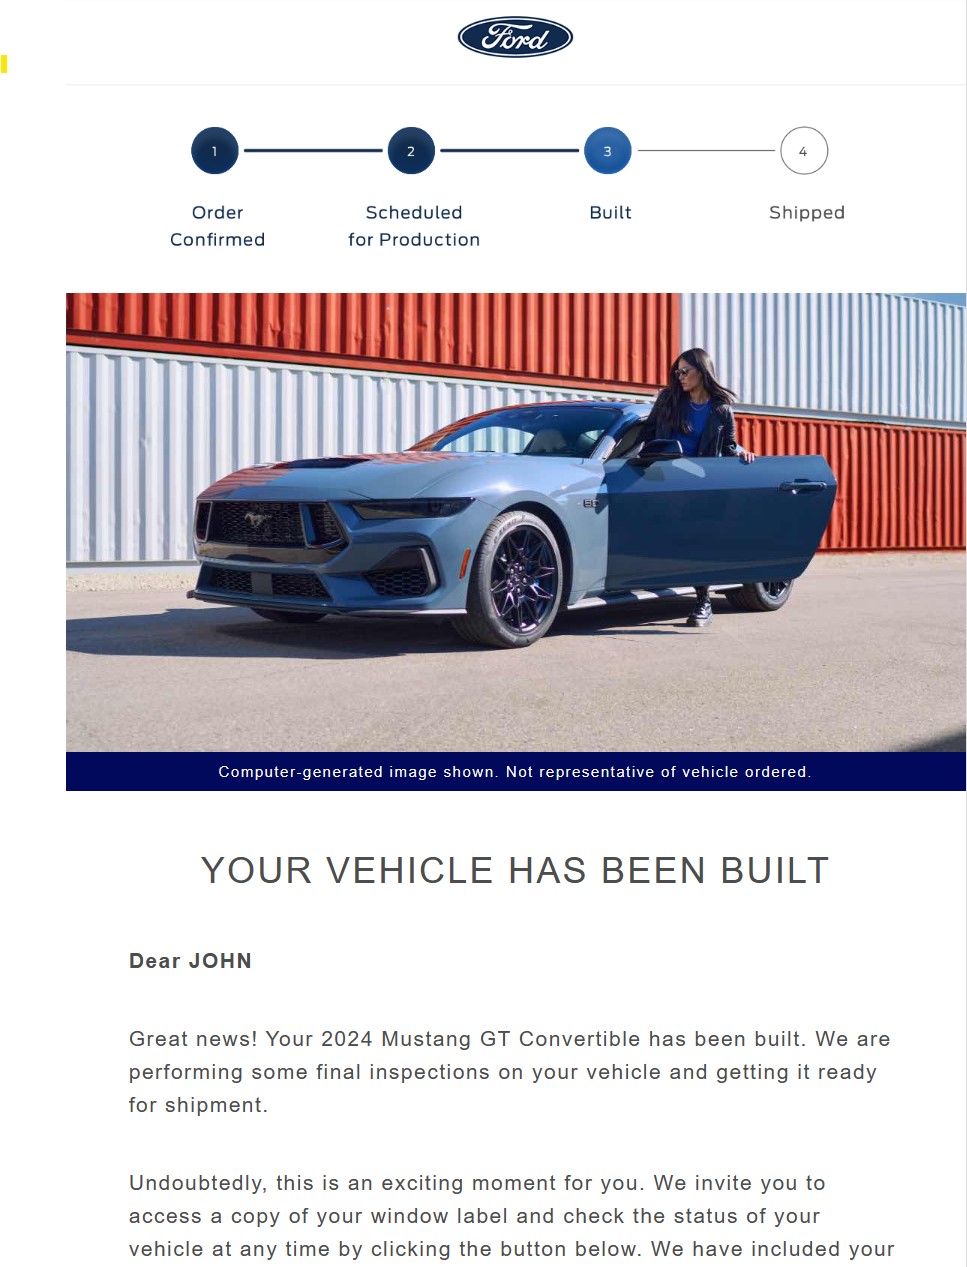 S650 Mustang I got excited over the email and then... Screenshot 2023-09-01 102236